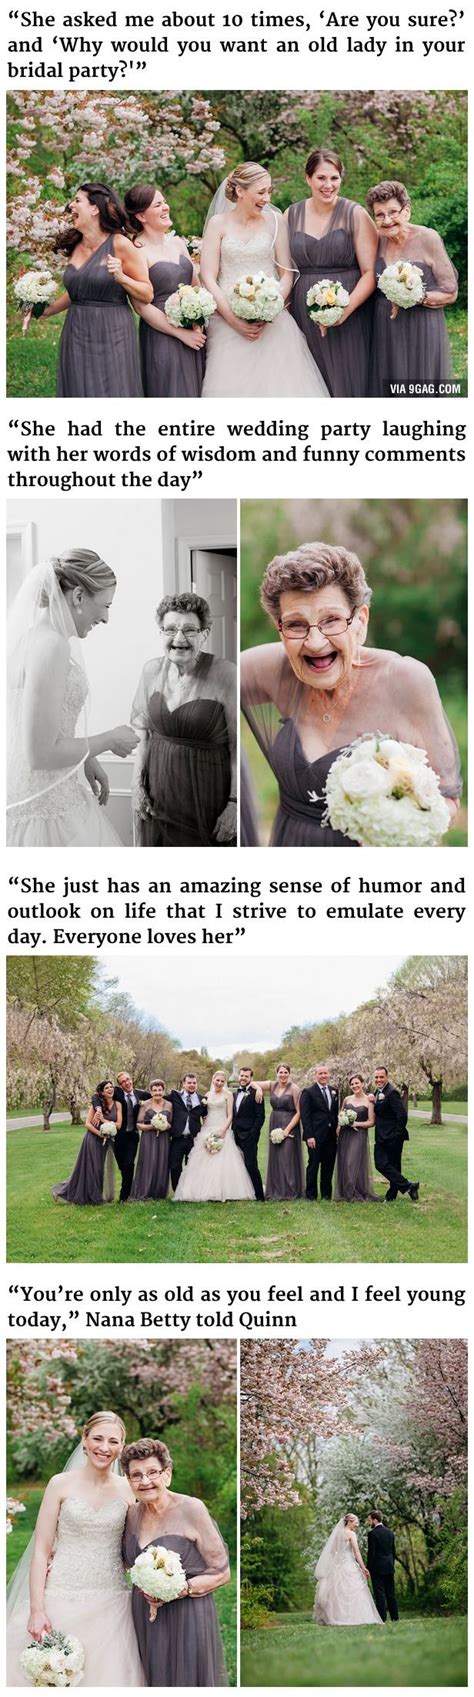 this bride invites her 89 year old grandma to be a bridesmaid at her